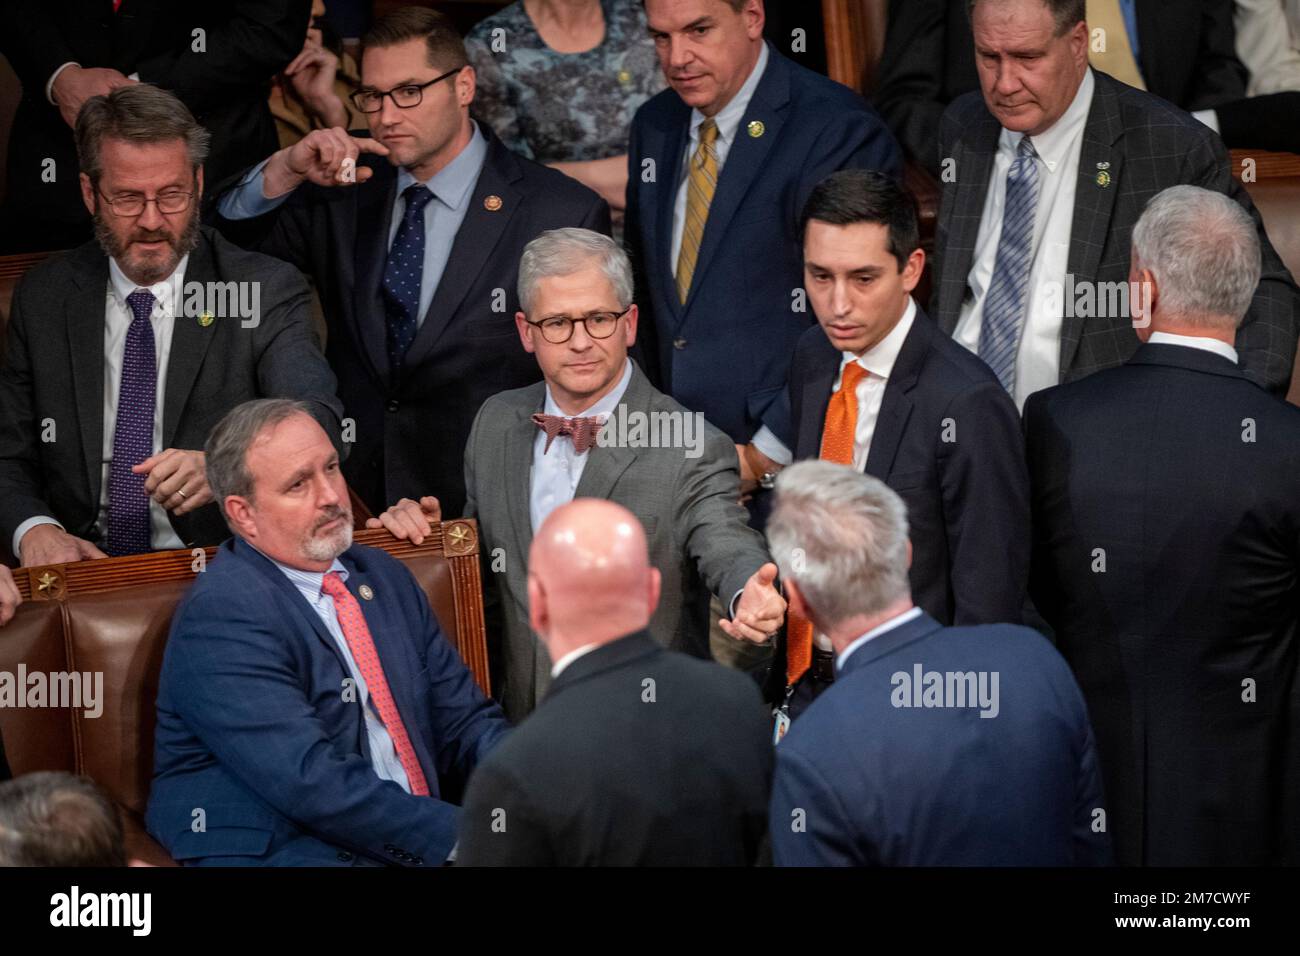 United States Representative Patrick McHenry (Republican of North Carolina) tries to calm down the tension following a verbal confrontation between United States Representative Matt Gaetz (Republican of Florida), who voted 'present,” and US House Republican Leader Kevin McCarthy (Republican of California), after Mr. McCarthy failed to get the votes he needed for the Speakership, on the 14th vote attempt, at the US Capitol, in Washington, DC, Saturday, January 7, 2023. Credit: Rod Lamkey/CNP/Sipa USA(RESTRICTION: NO New York or New Jersey Newspapers or newspapers within a 75 mile radius of N Stock Photo